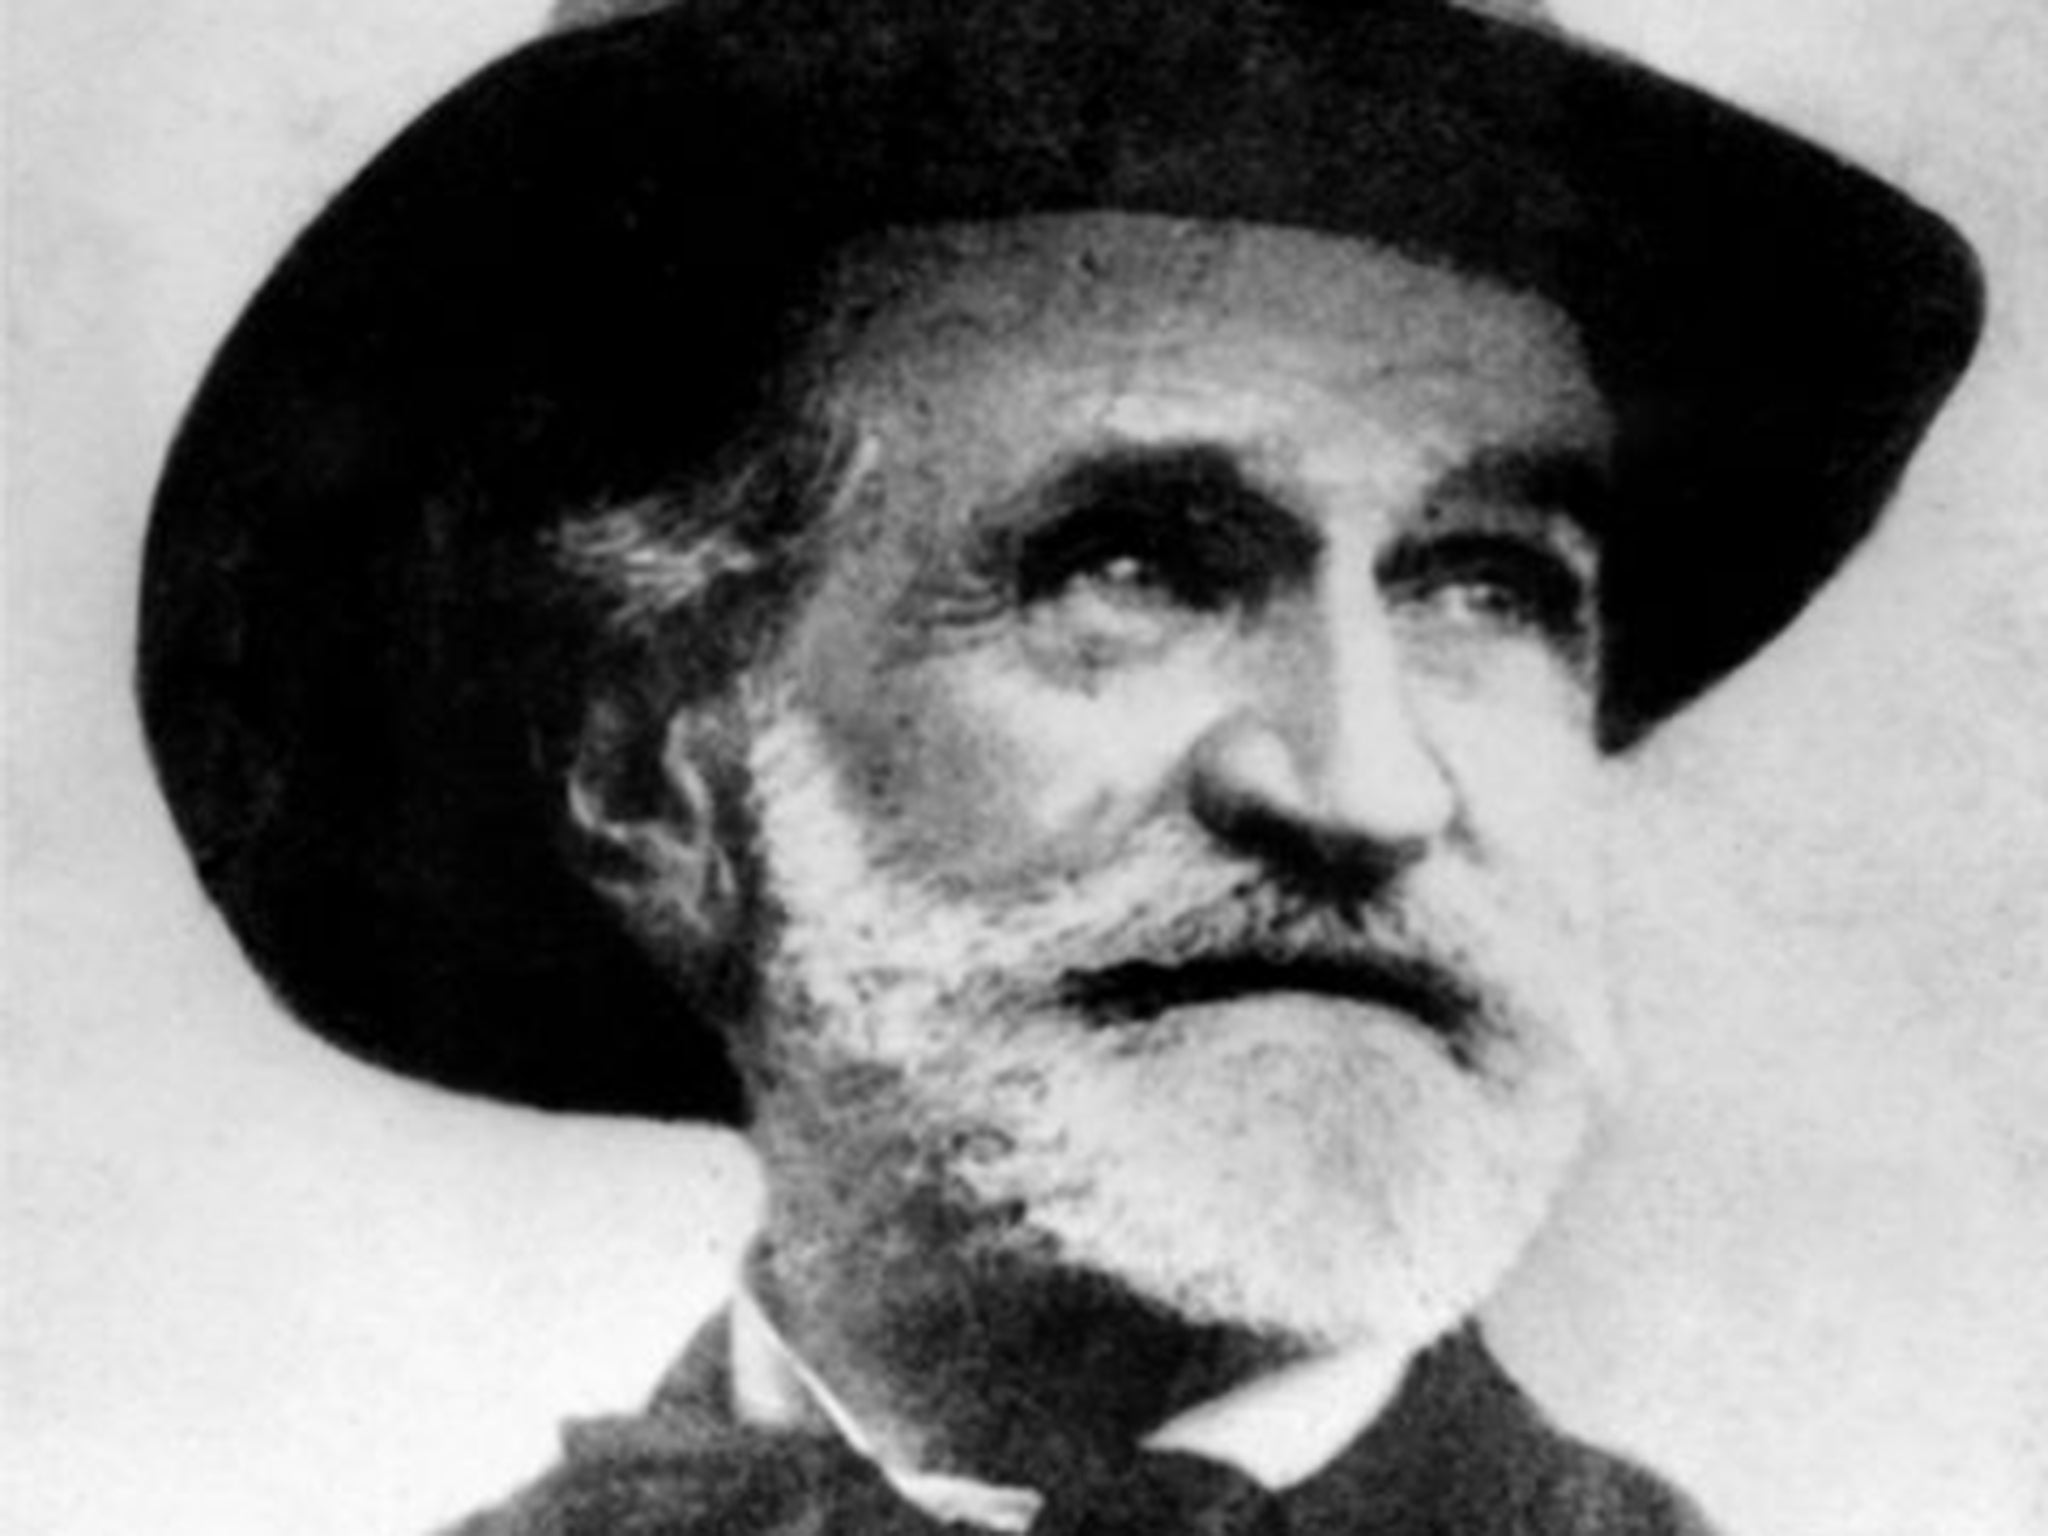 Verdi seemed to instinctively know that his music had a calming influence